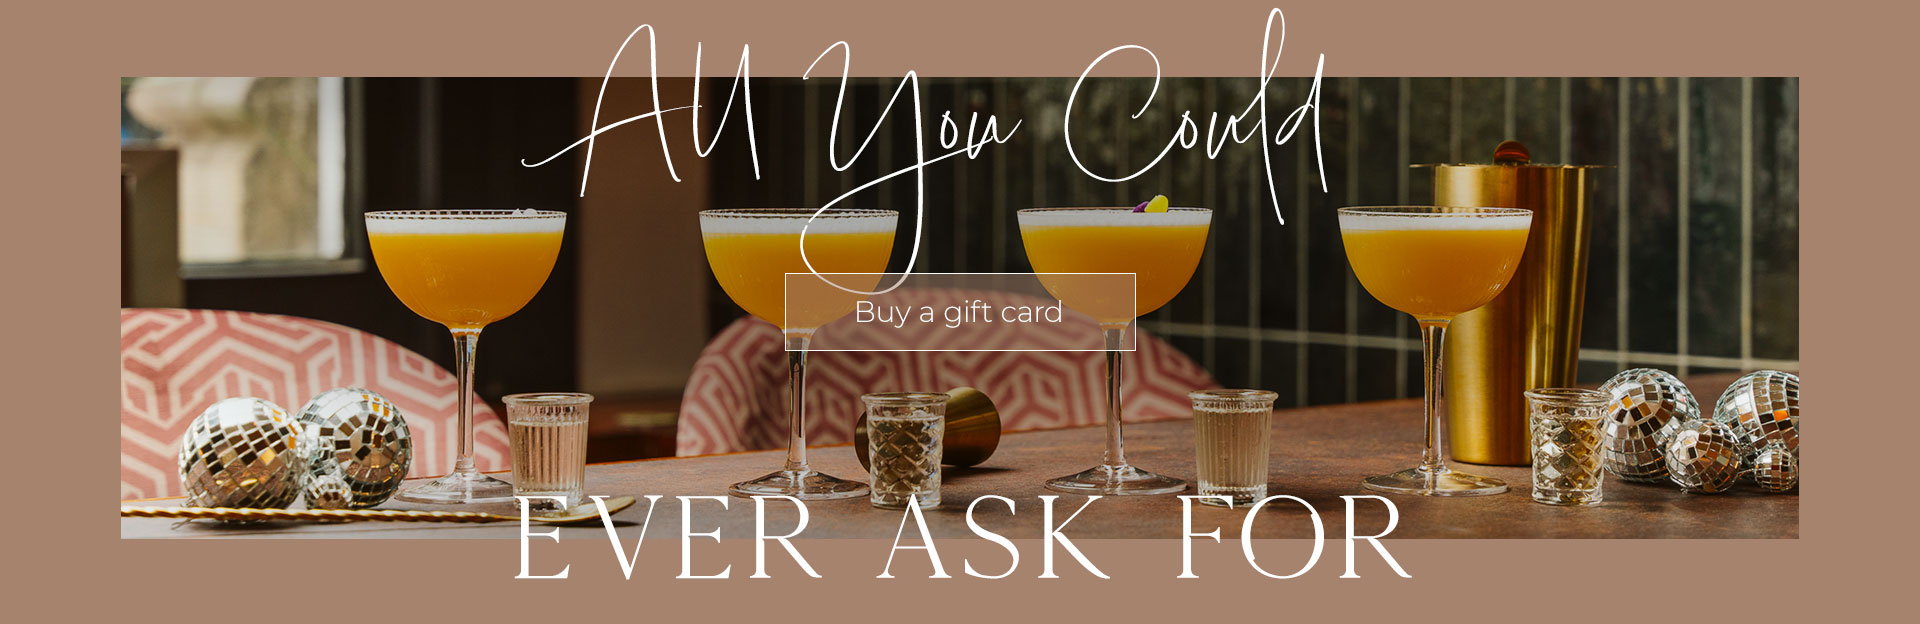 All Bar One Gift Cards at All Bar One Butlers Wharf